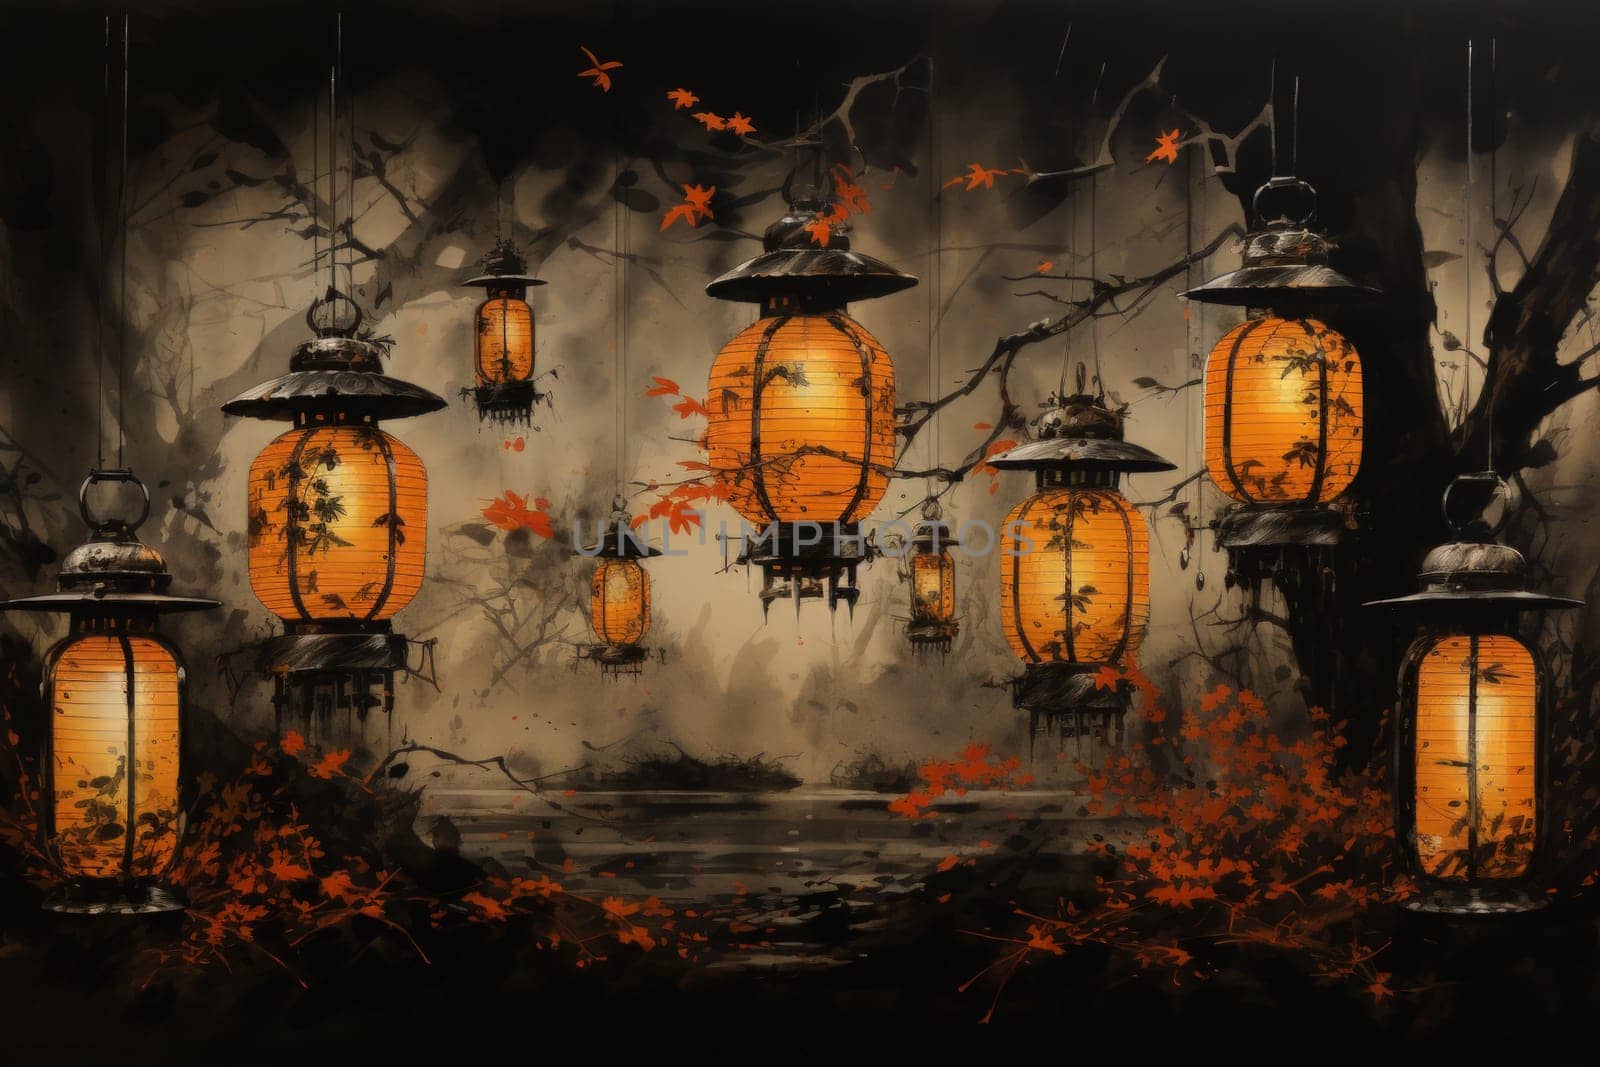 Step into a realm of ethereal beauty, where illuminated spirit lanterns serve as beacons of hope.